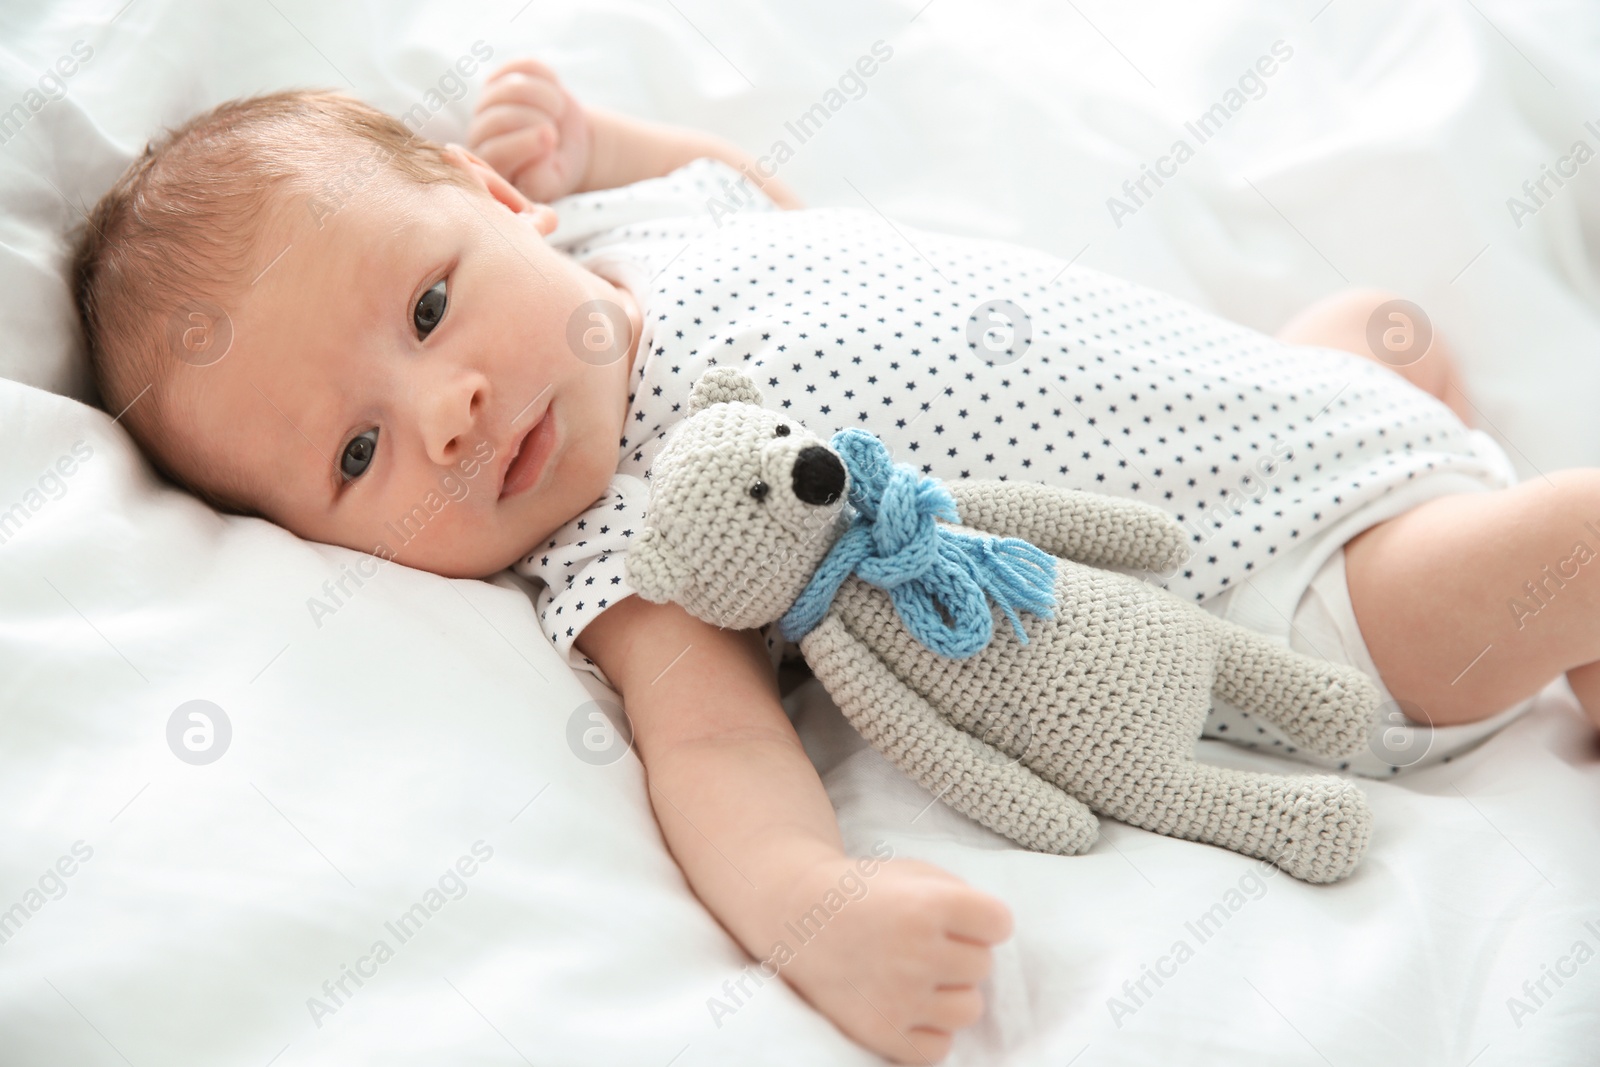 Photo of Adorable newborn baby with toy lying on bed sheet